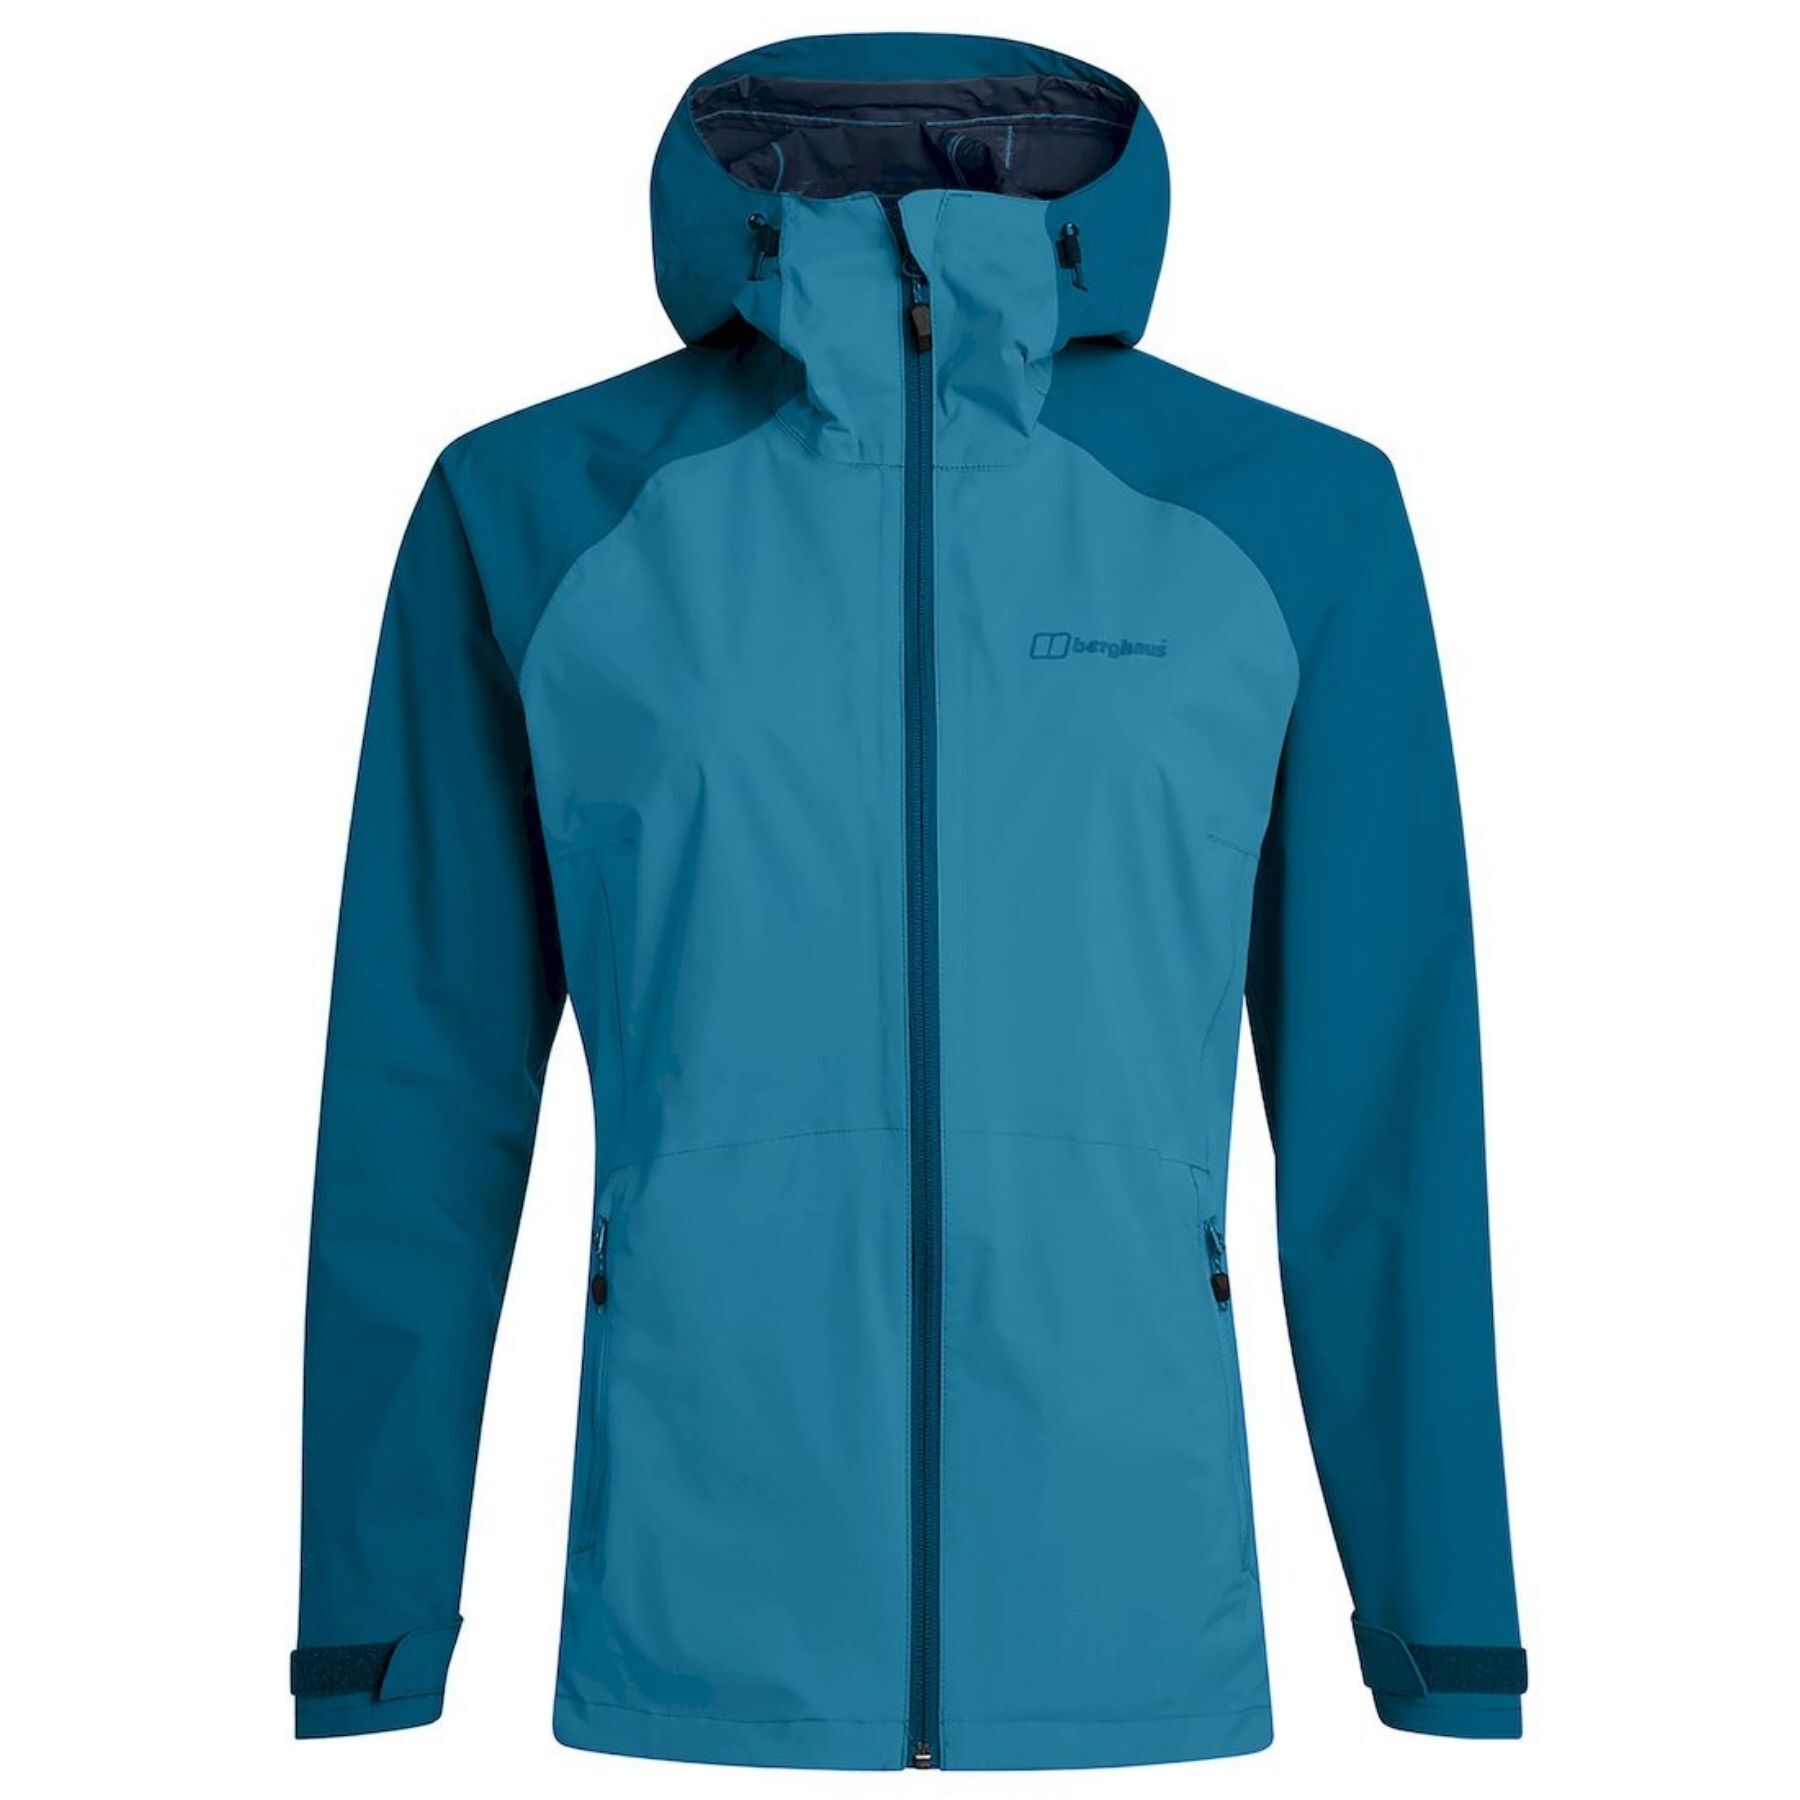 Berghaus Deluge Pro Shell Jacket - Giacca antipioggia - Donna